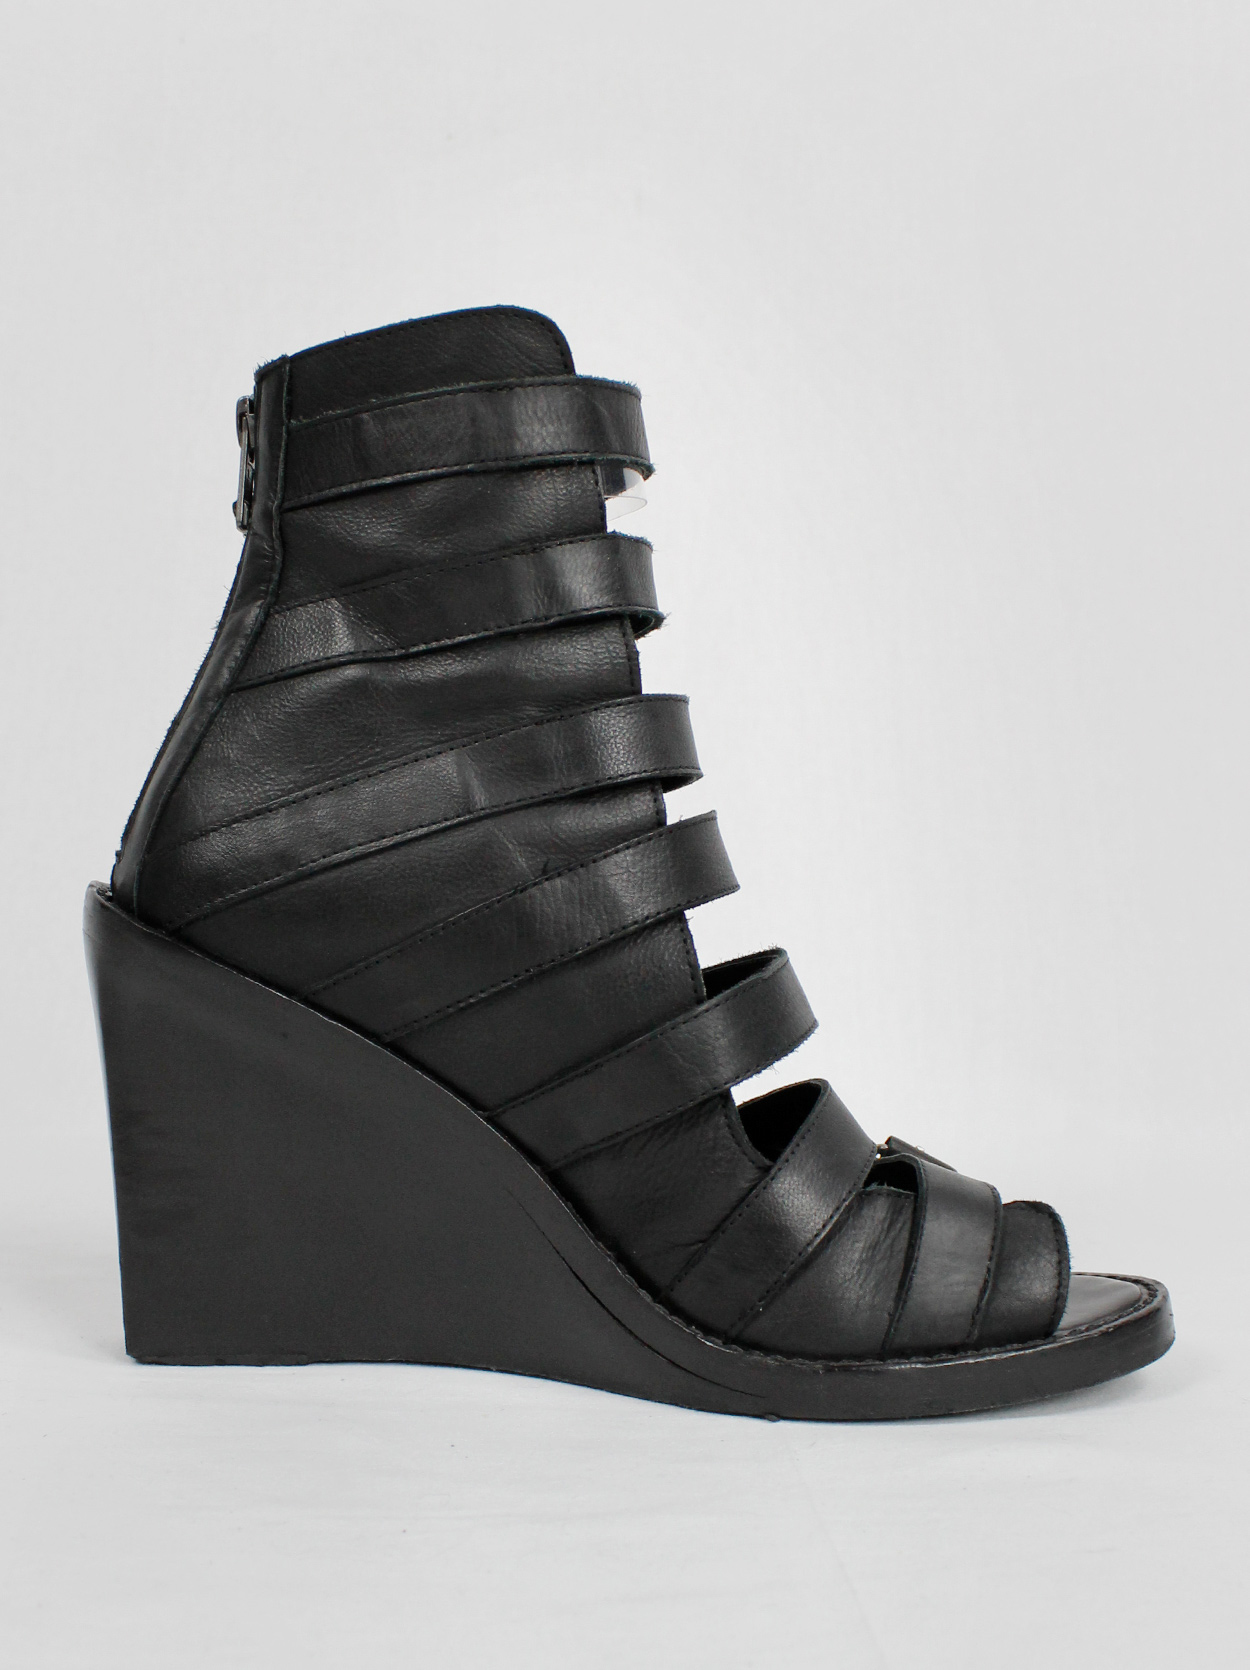 Ann Demeulemeester Blanche black wedge sandals with buckle belts (39 ...